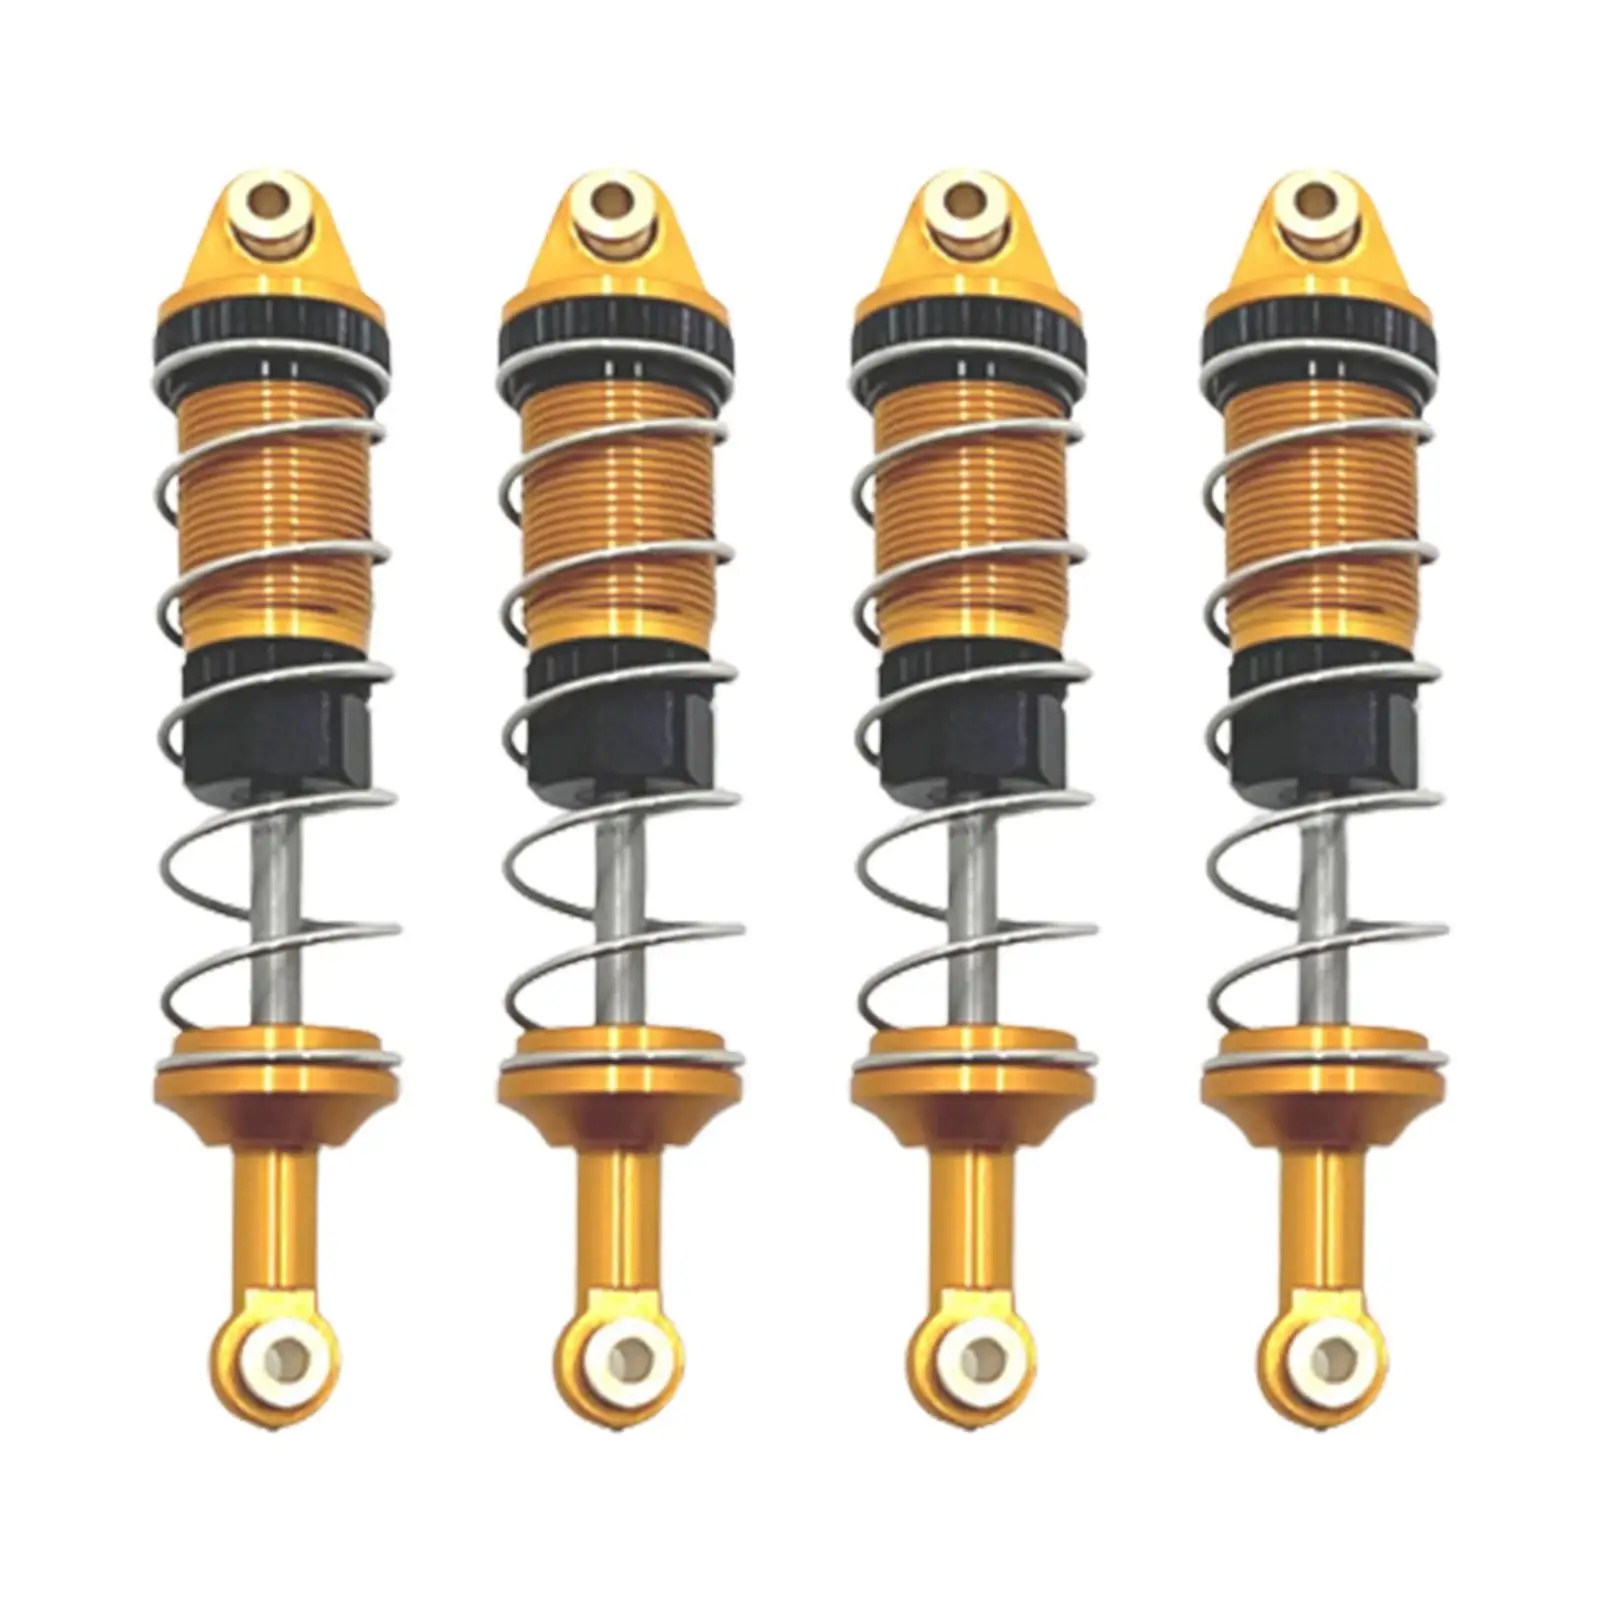 4Pcs RC Shock Absorber Front and Rear RC Shocks Damper Replacement Parts for 16207 16208 16209 1/16 Scale Model Vehicles